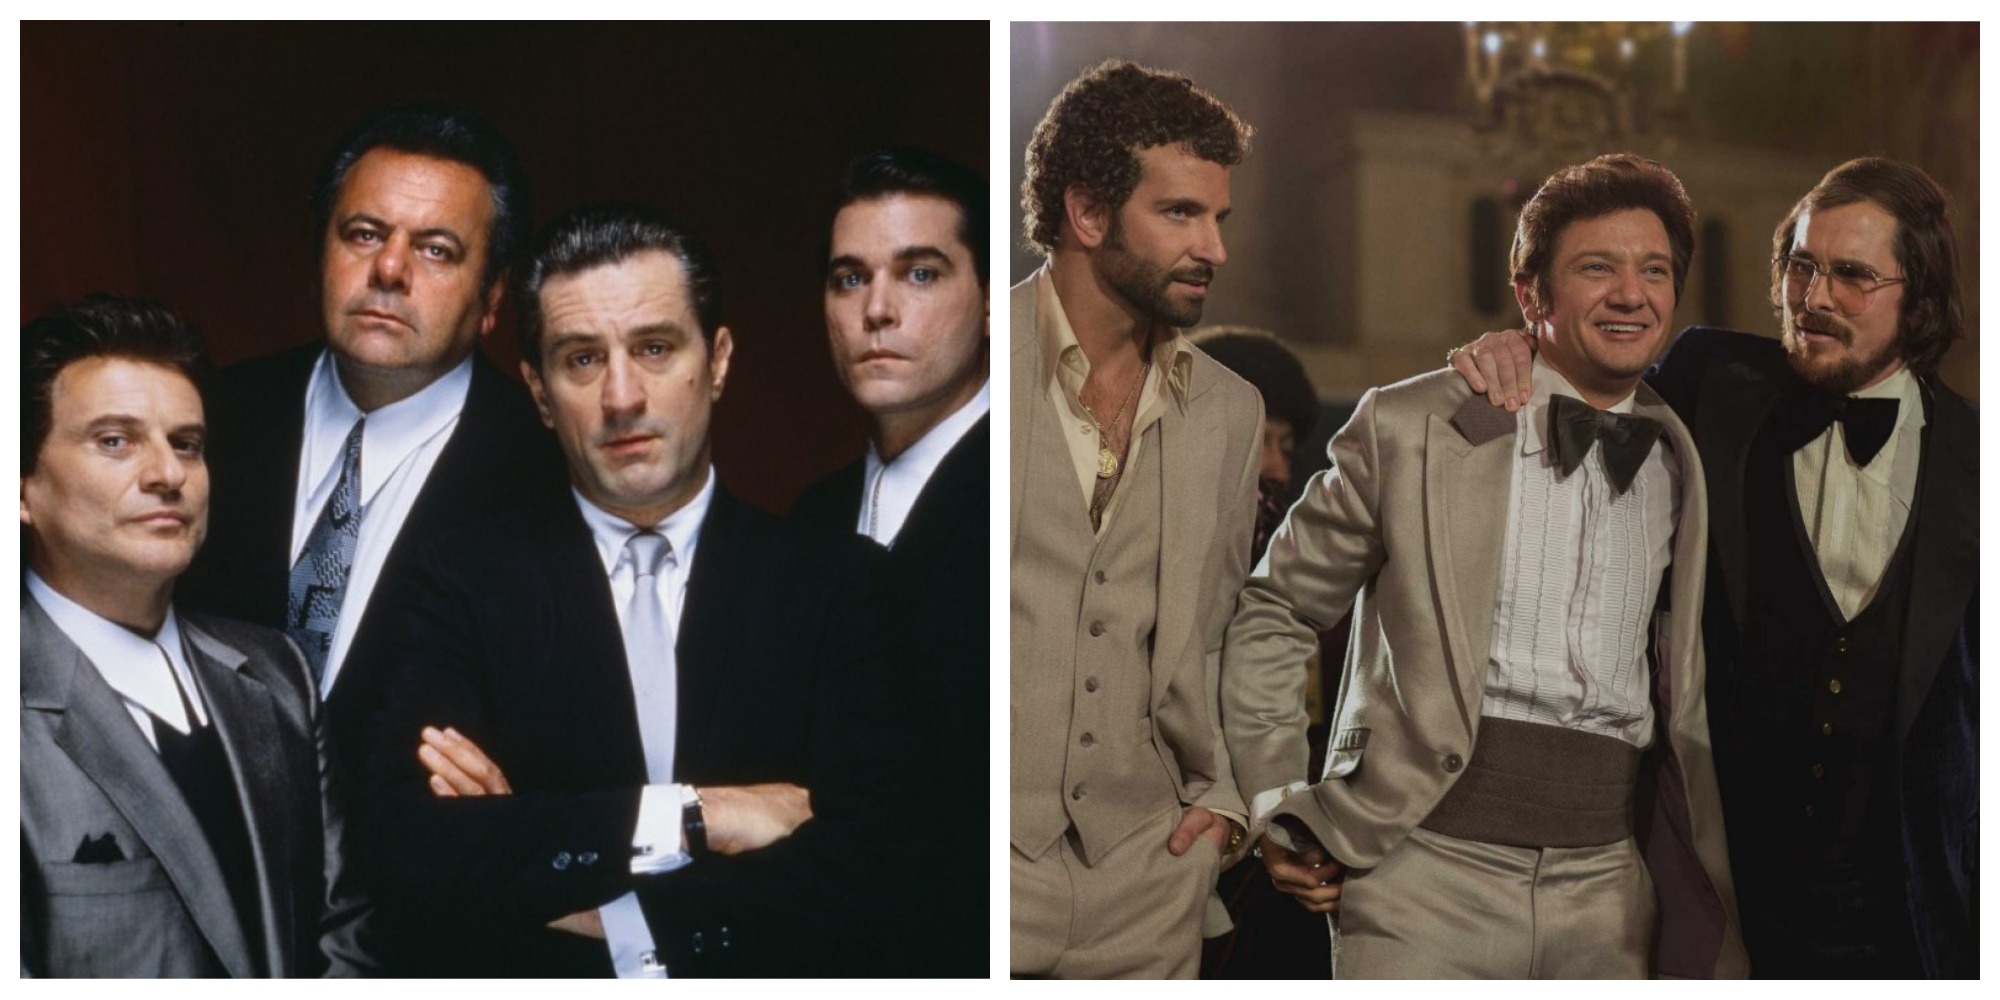 Retro Rental: Hindsight, ‘Hustle’ and Henry Hill